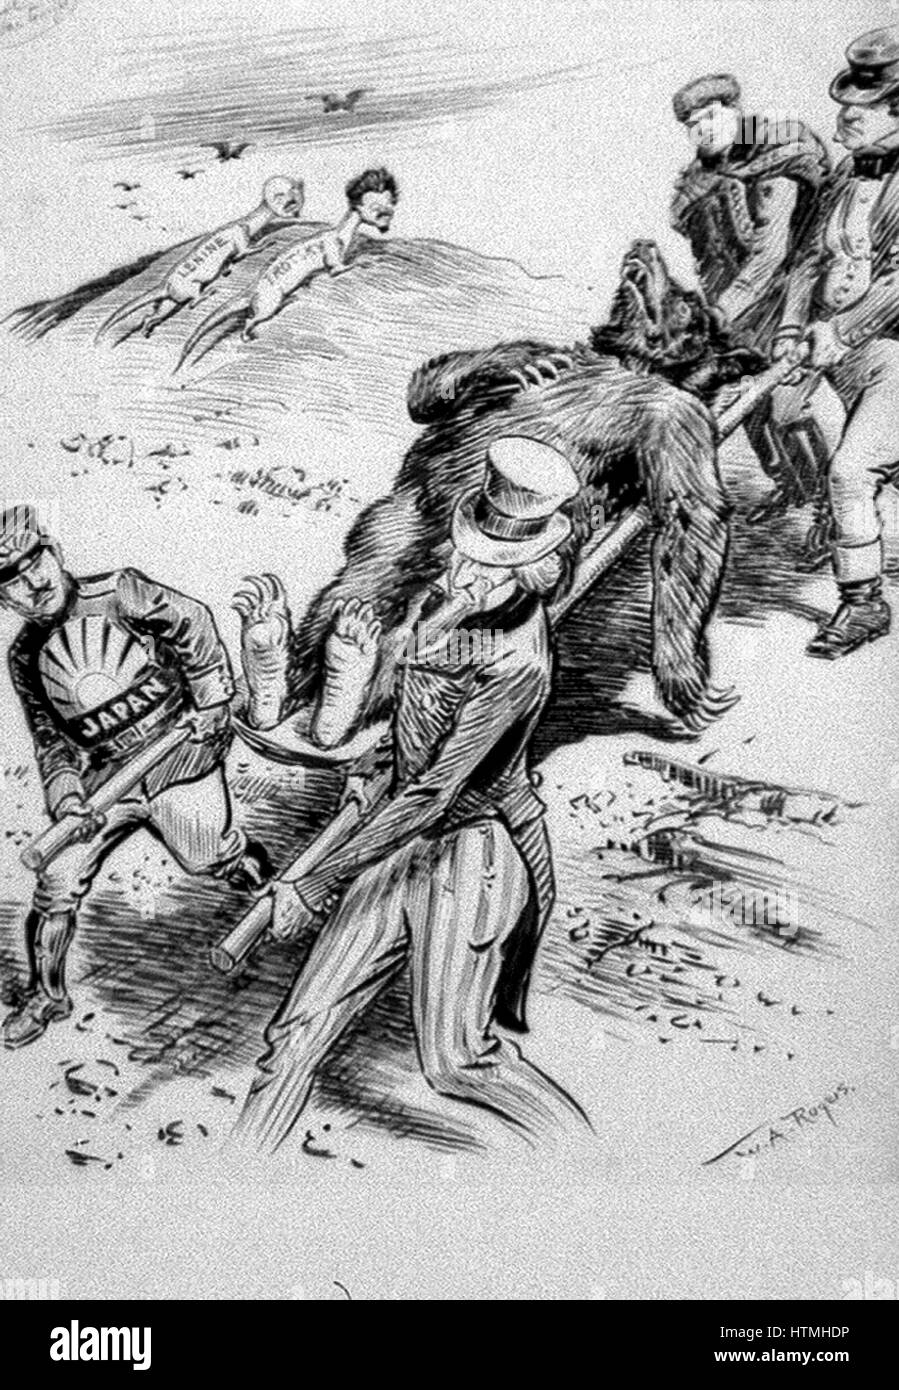 'A hospital case' 1918 pen and ink By William Allen Rogers 1854-1931. The allies (Japan, Czech, England (John Bull), and United States (Uncle Sam) carrying a litter with a wounded bear (Soviet Union) while small animals (Trotsky and Lenin) (Lenin) watch f Stock Photo